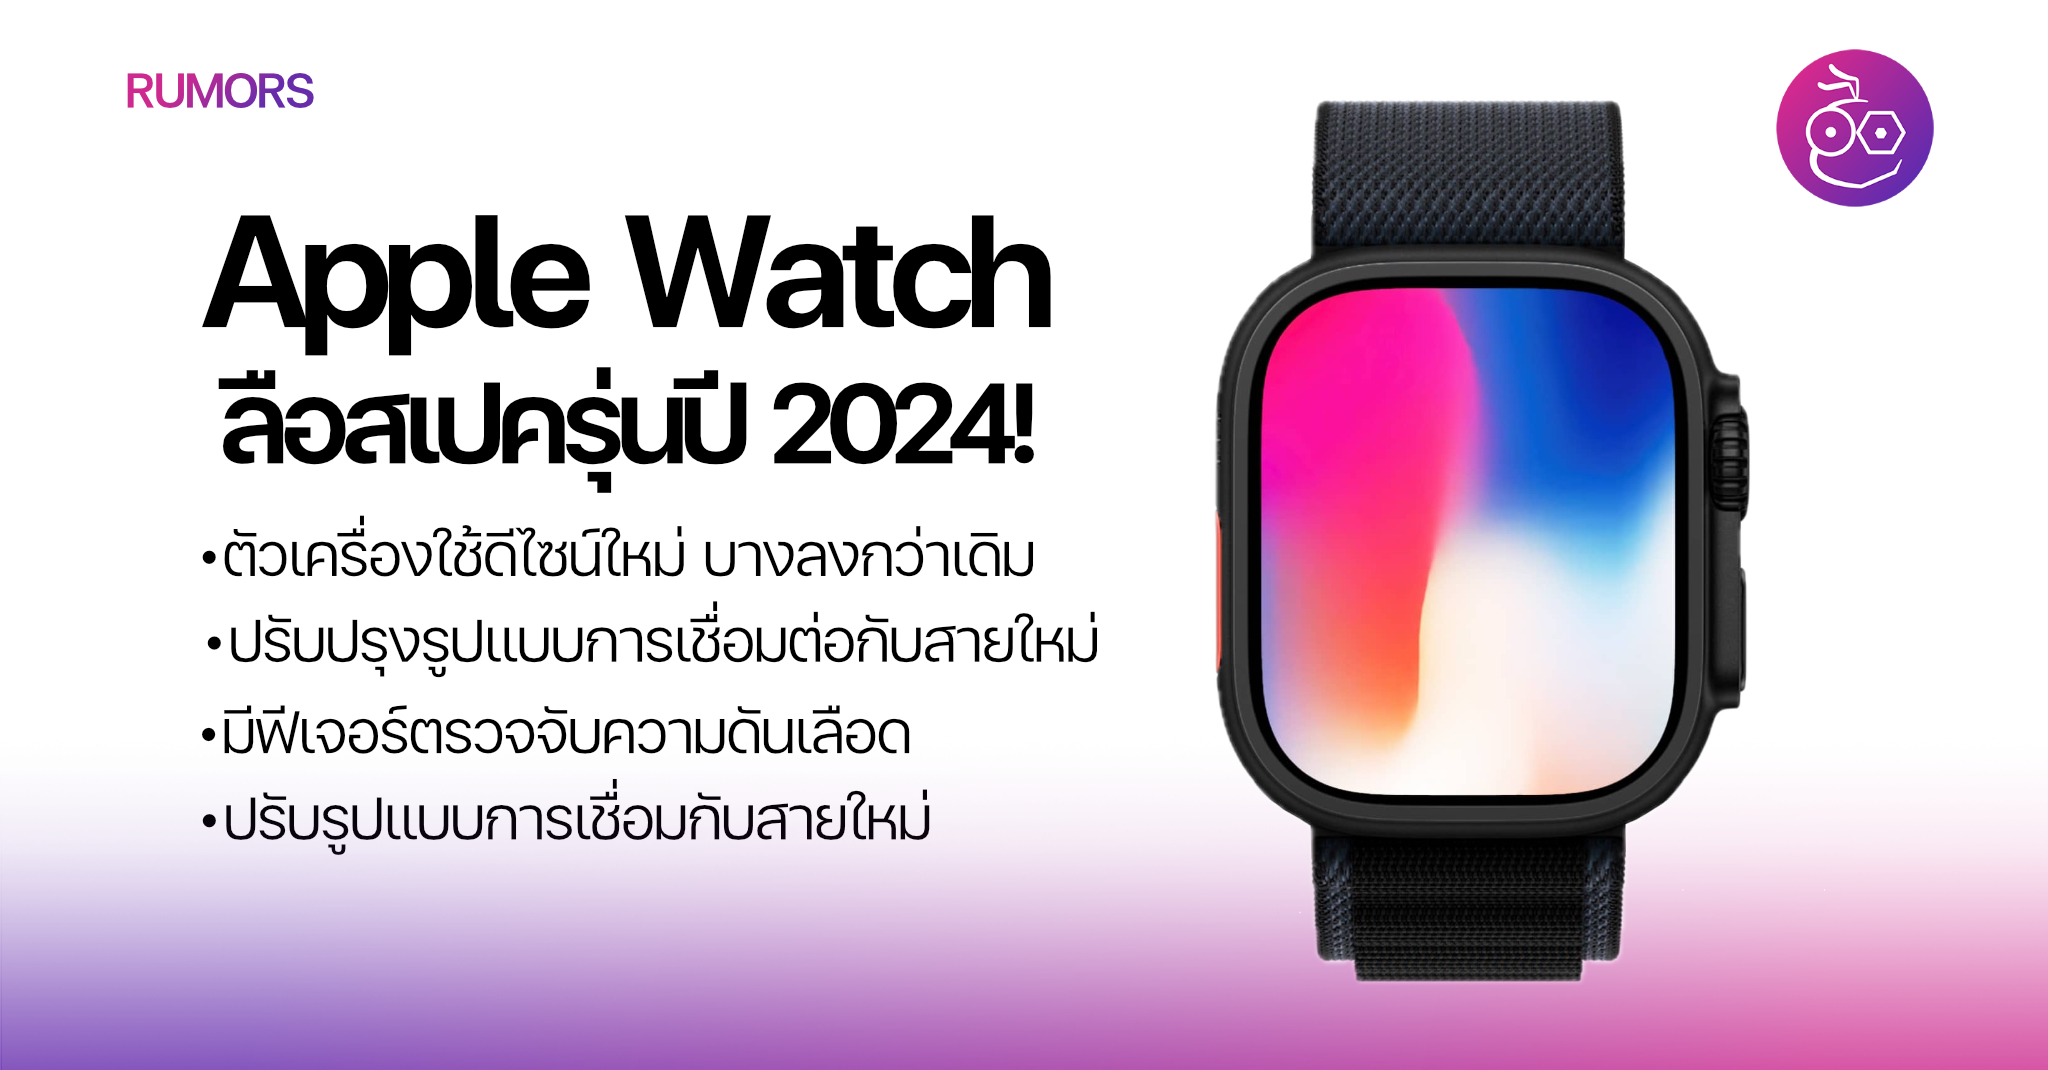 Rumors about Apple Watch specifications for 2024!